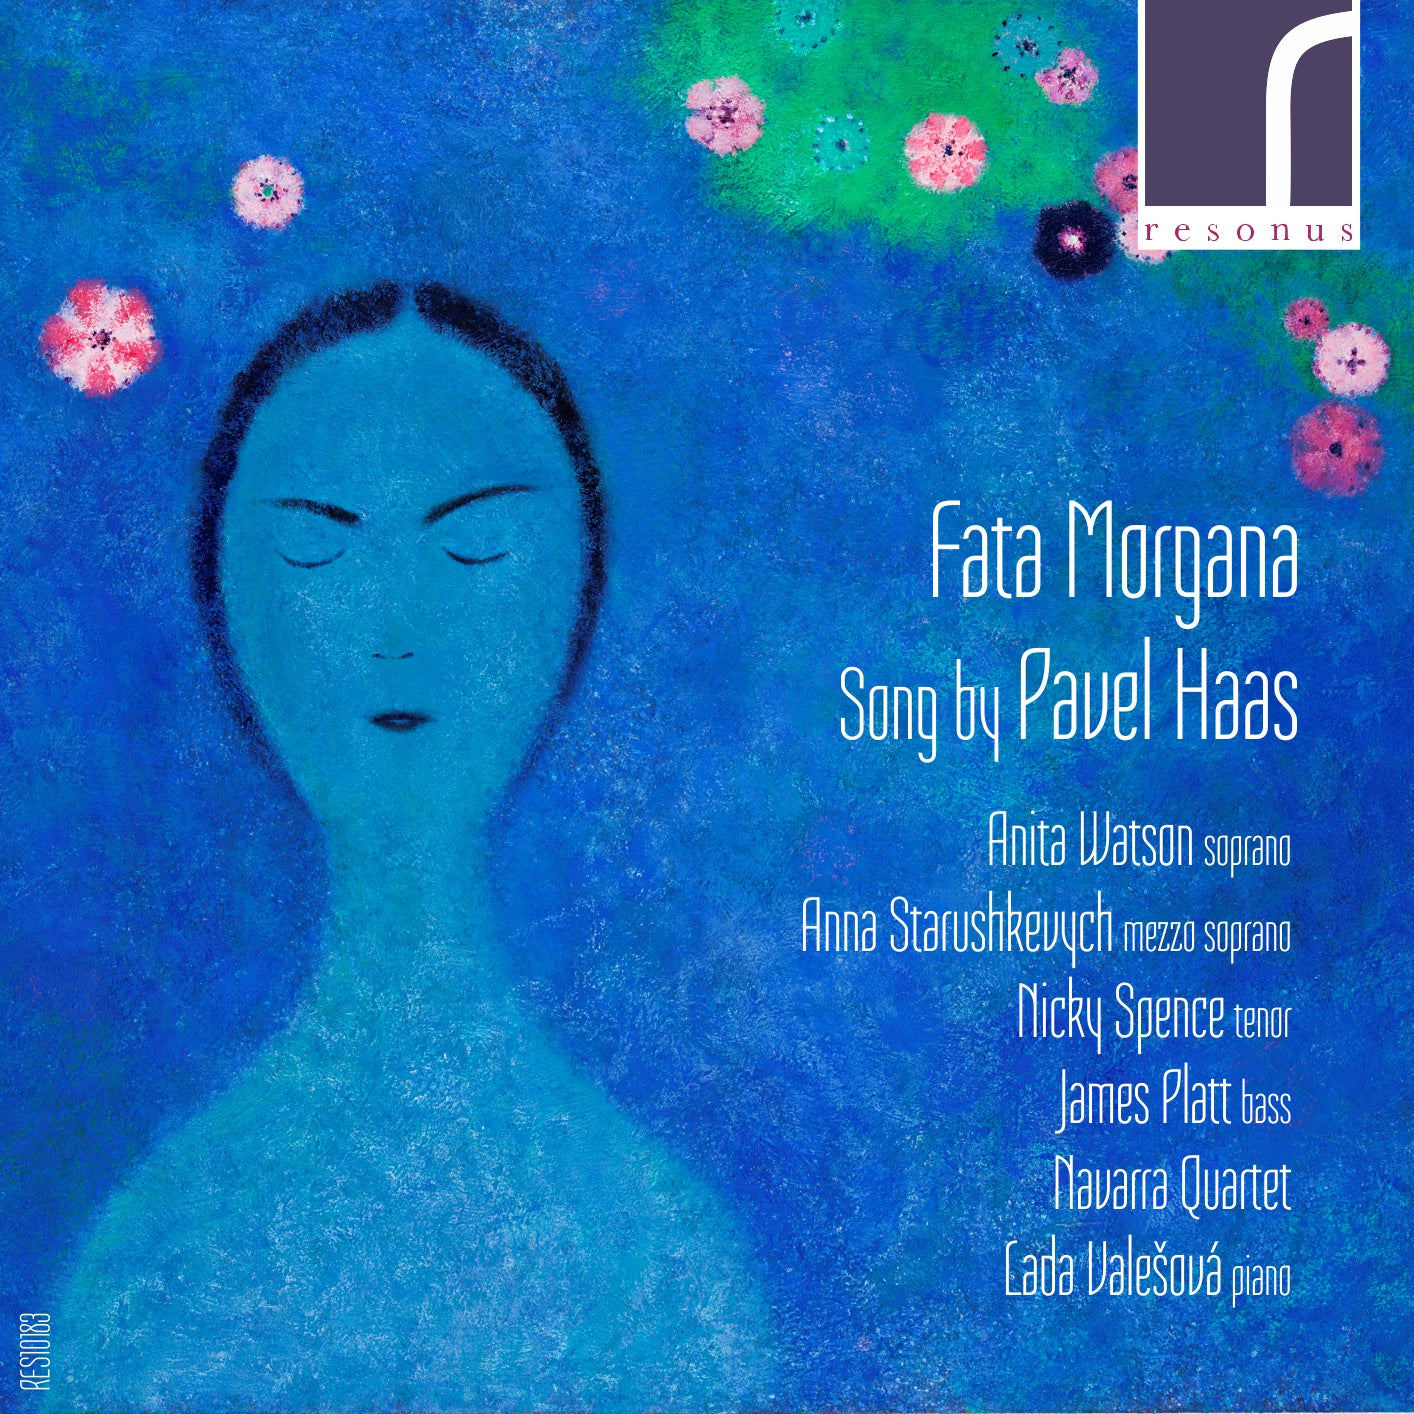 Fata Morgana: Song by Pavel Haas